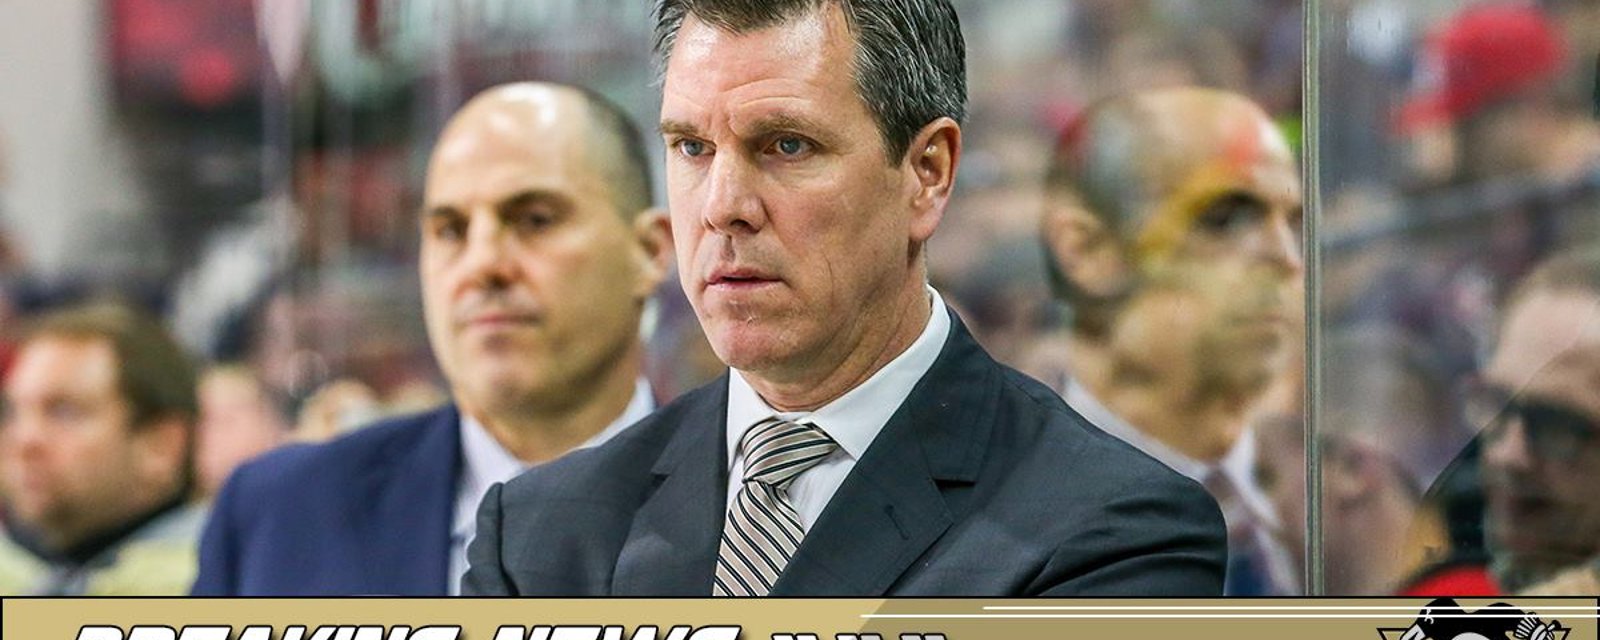 Breaking: Mike Sullivan comments on anthem protest while at the White House.